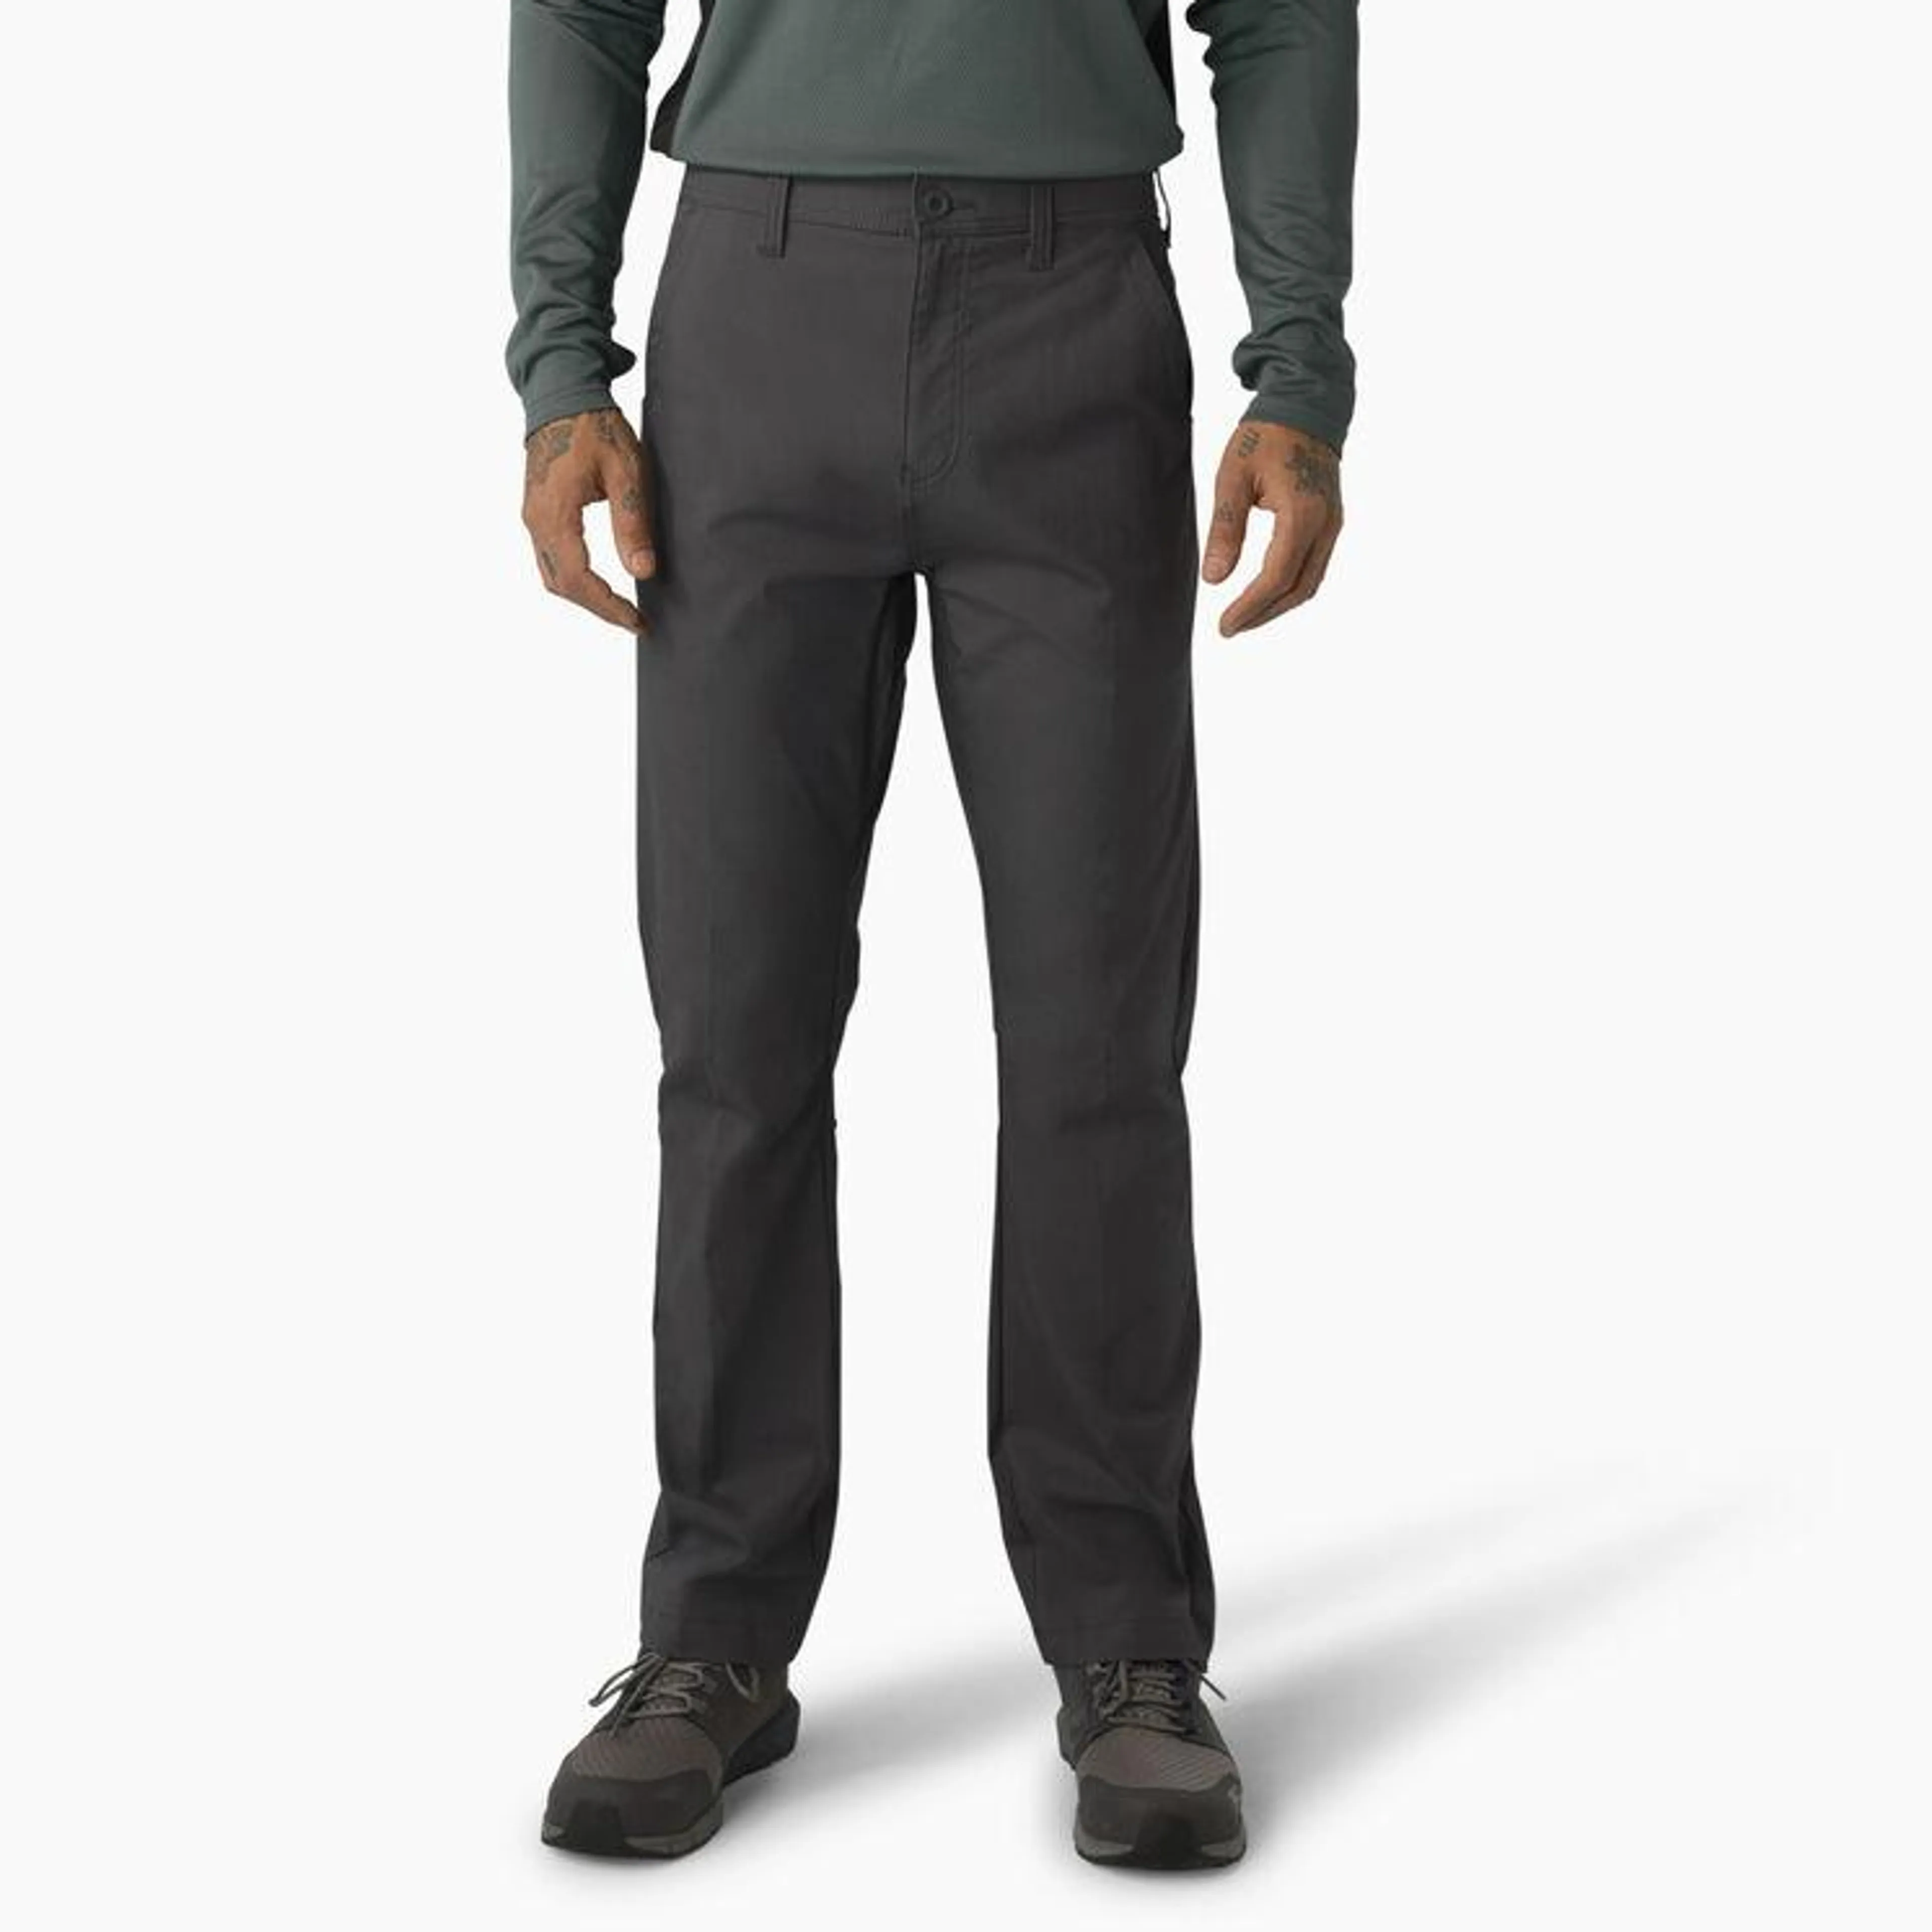 Cooling Hybrid Utility Pants, Charcoal Gray